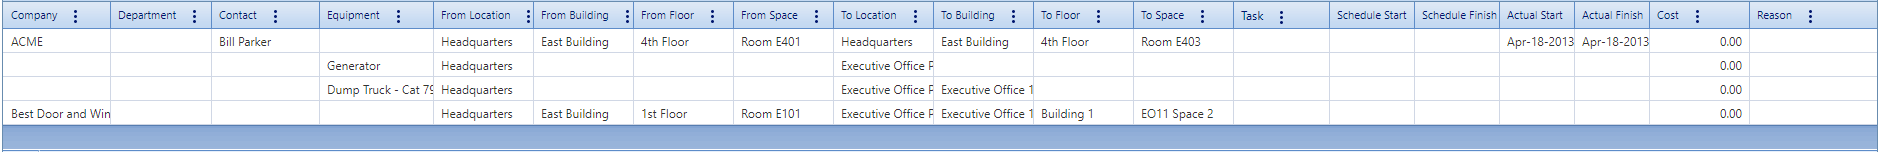 4. Move Plans Details Tab Table